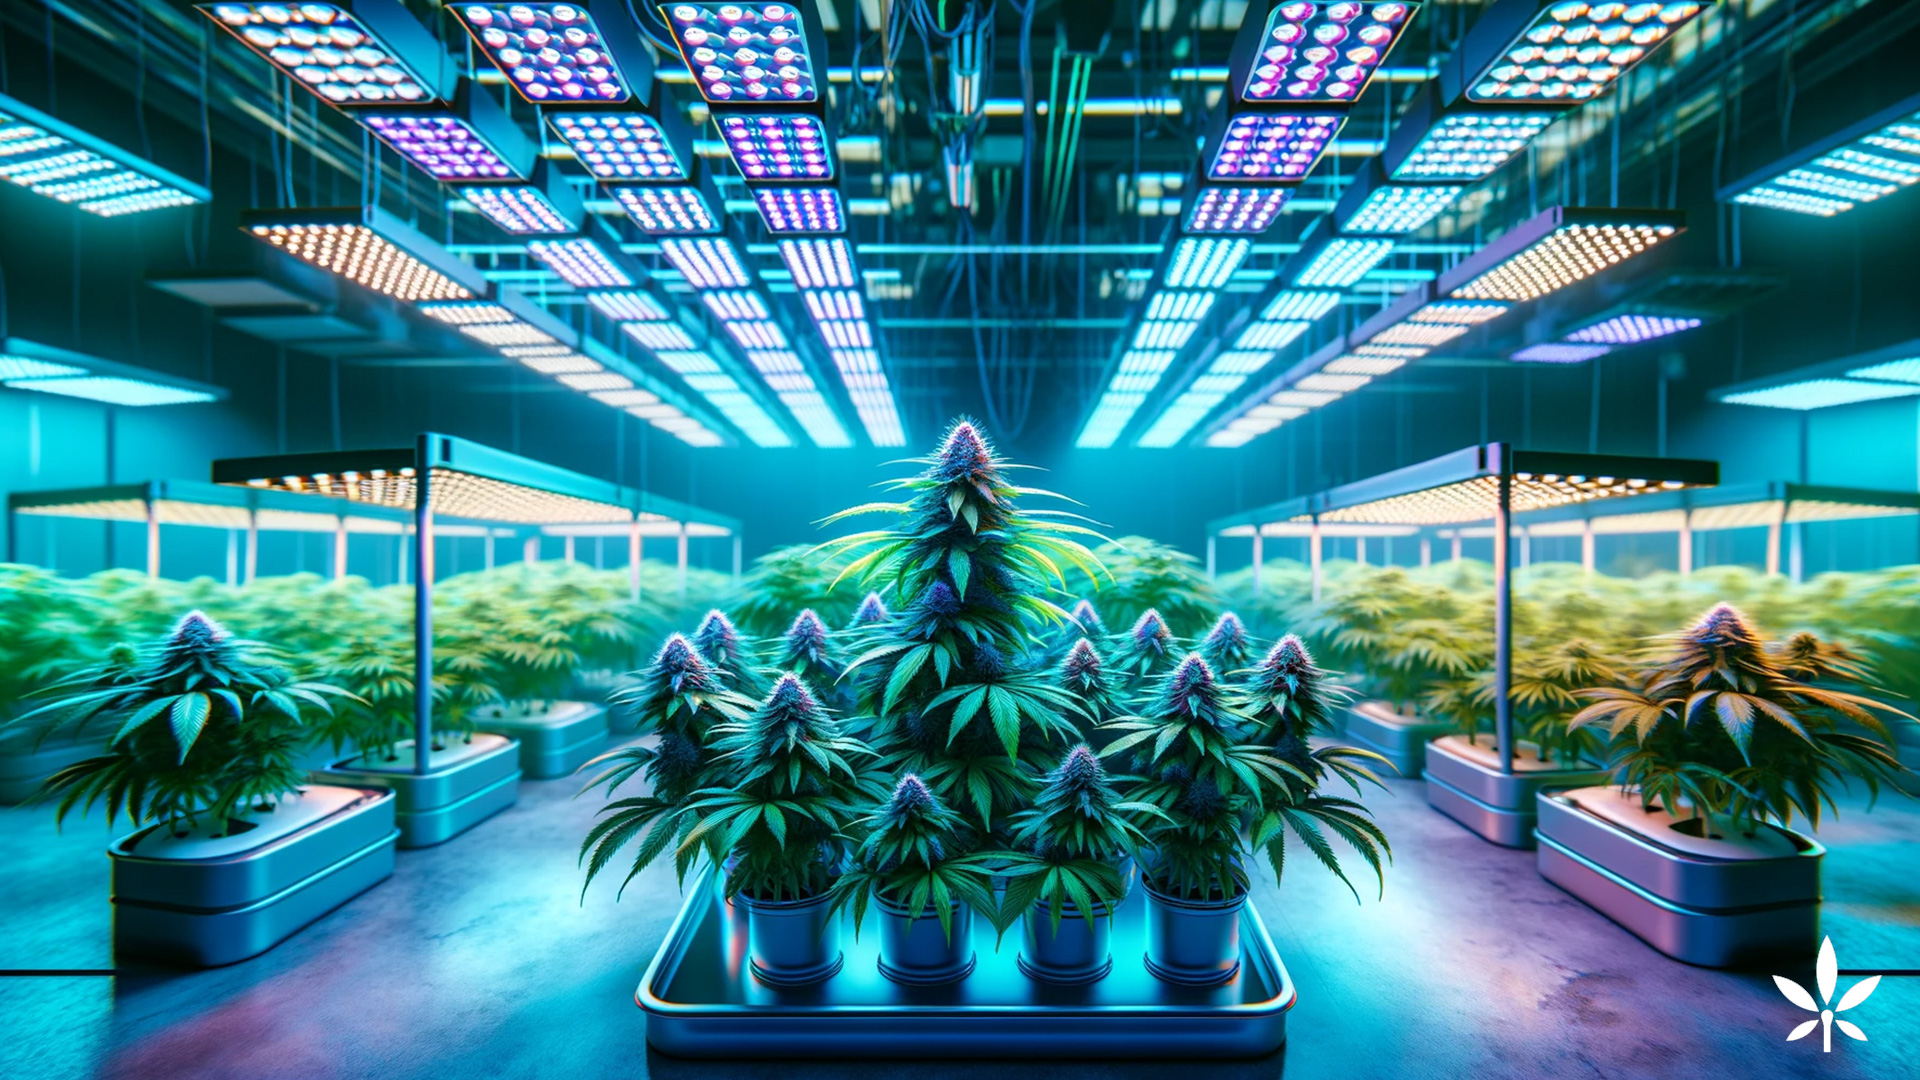 Modern nuEra cannabis cultivation facility featuring advanced LED lighting and hydroponic systems, symbolizing innovation in cannabis industry